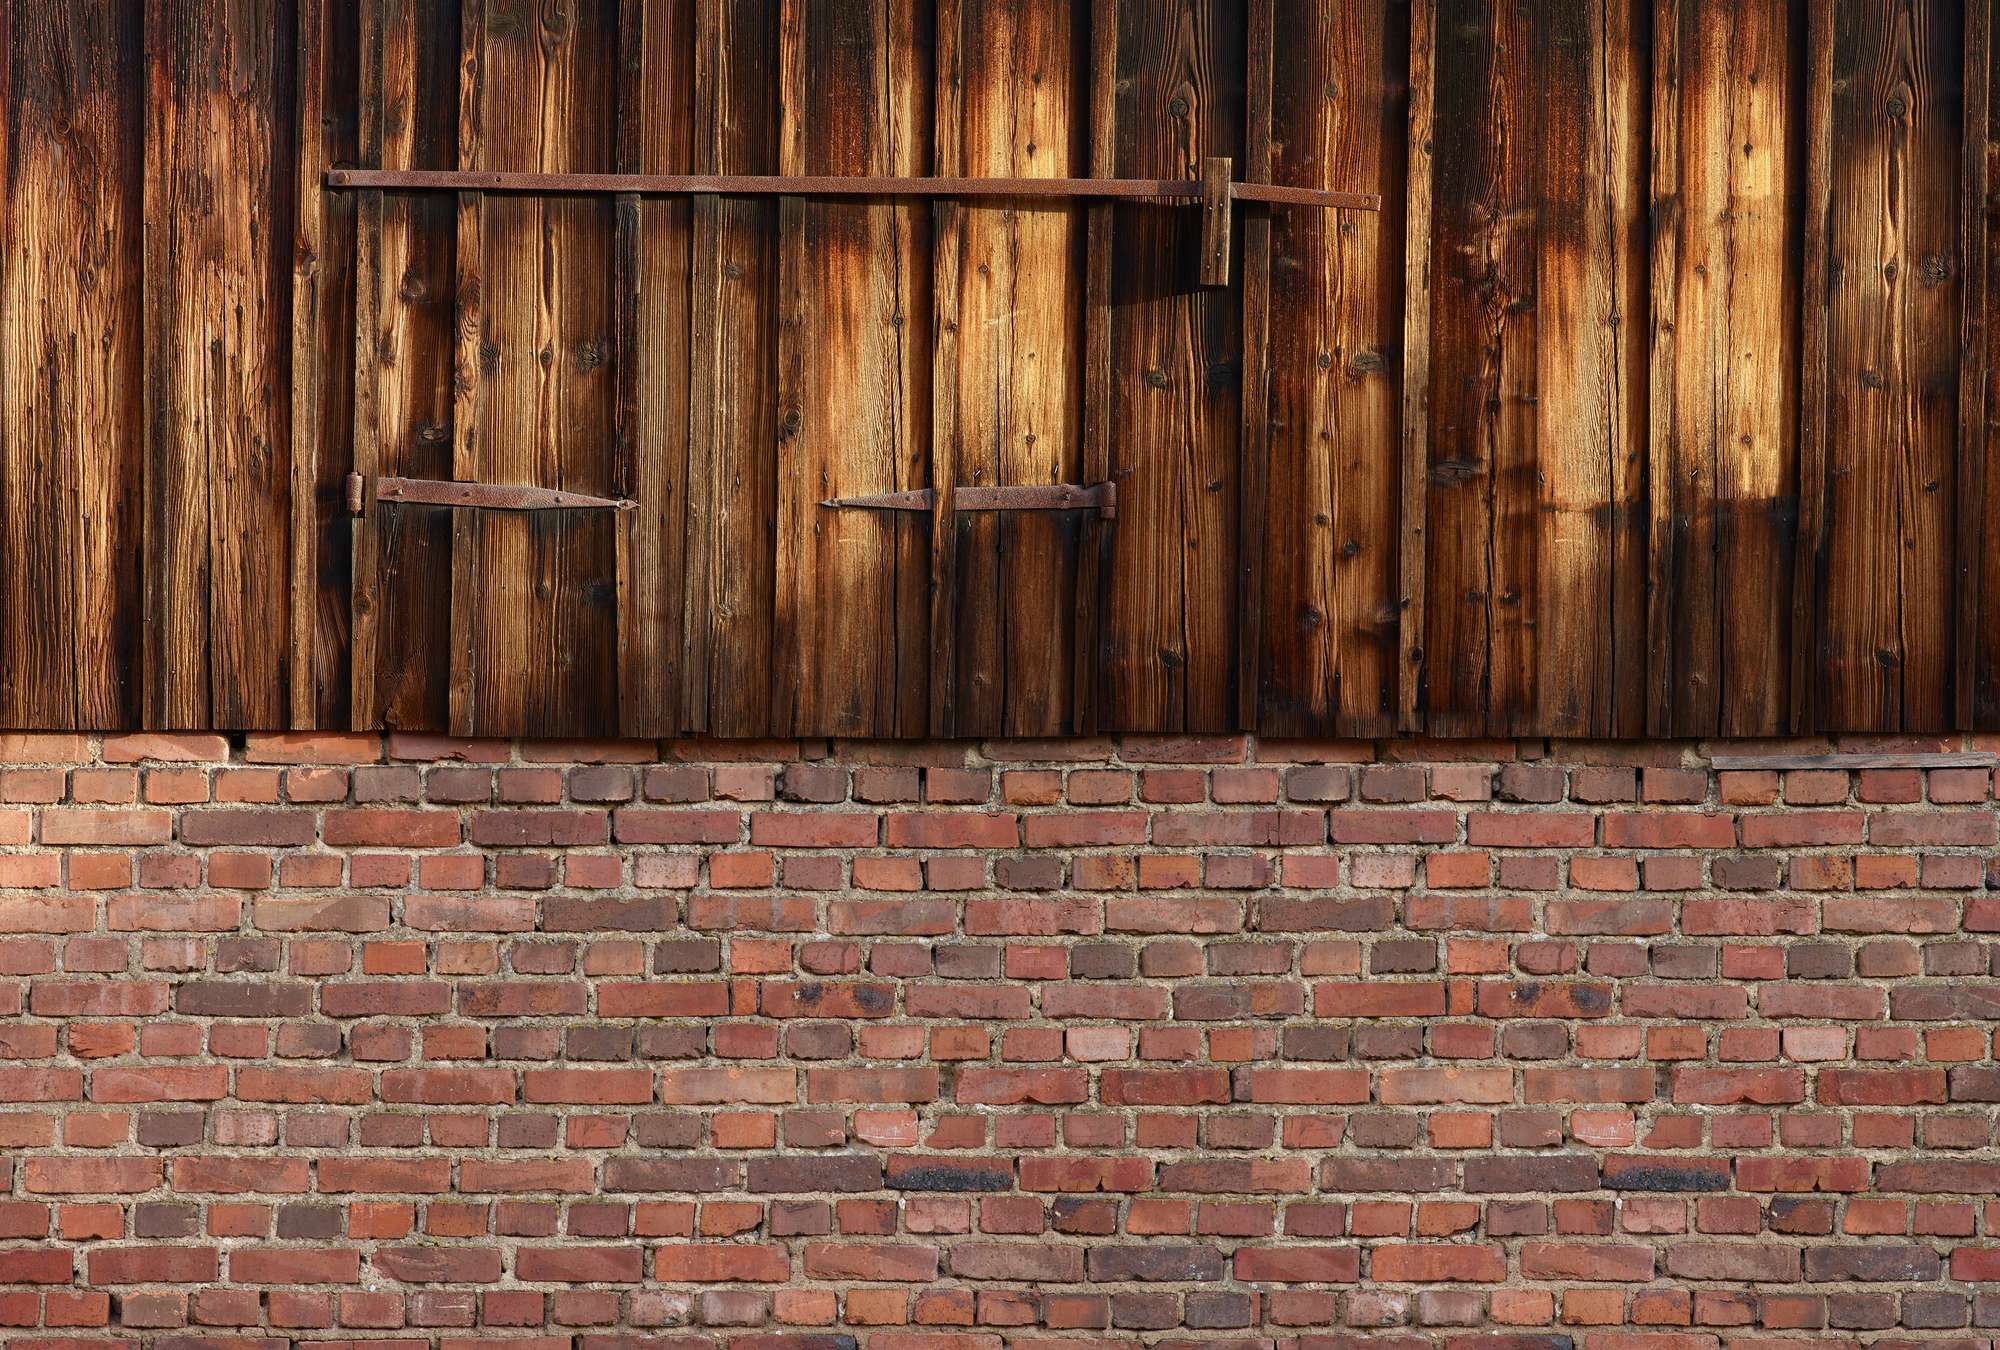             Photo wallpaper red brick wall with wood paneling
        